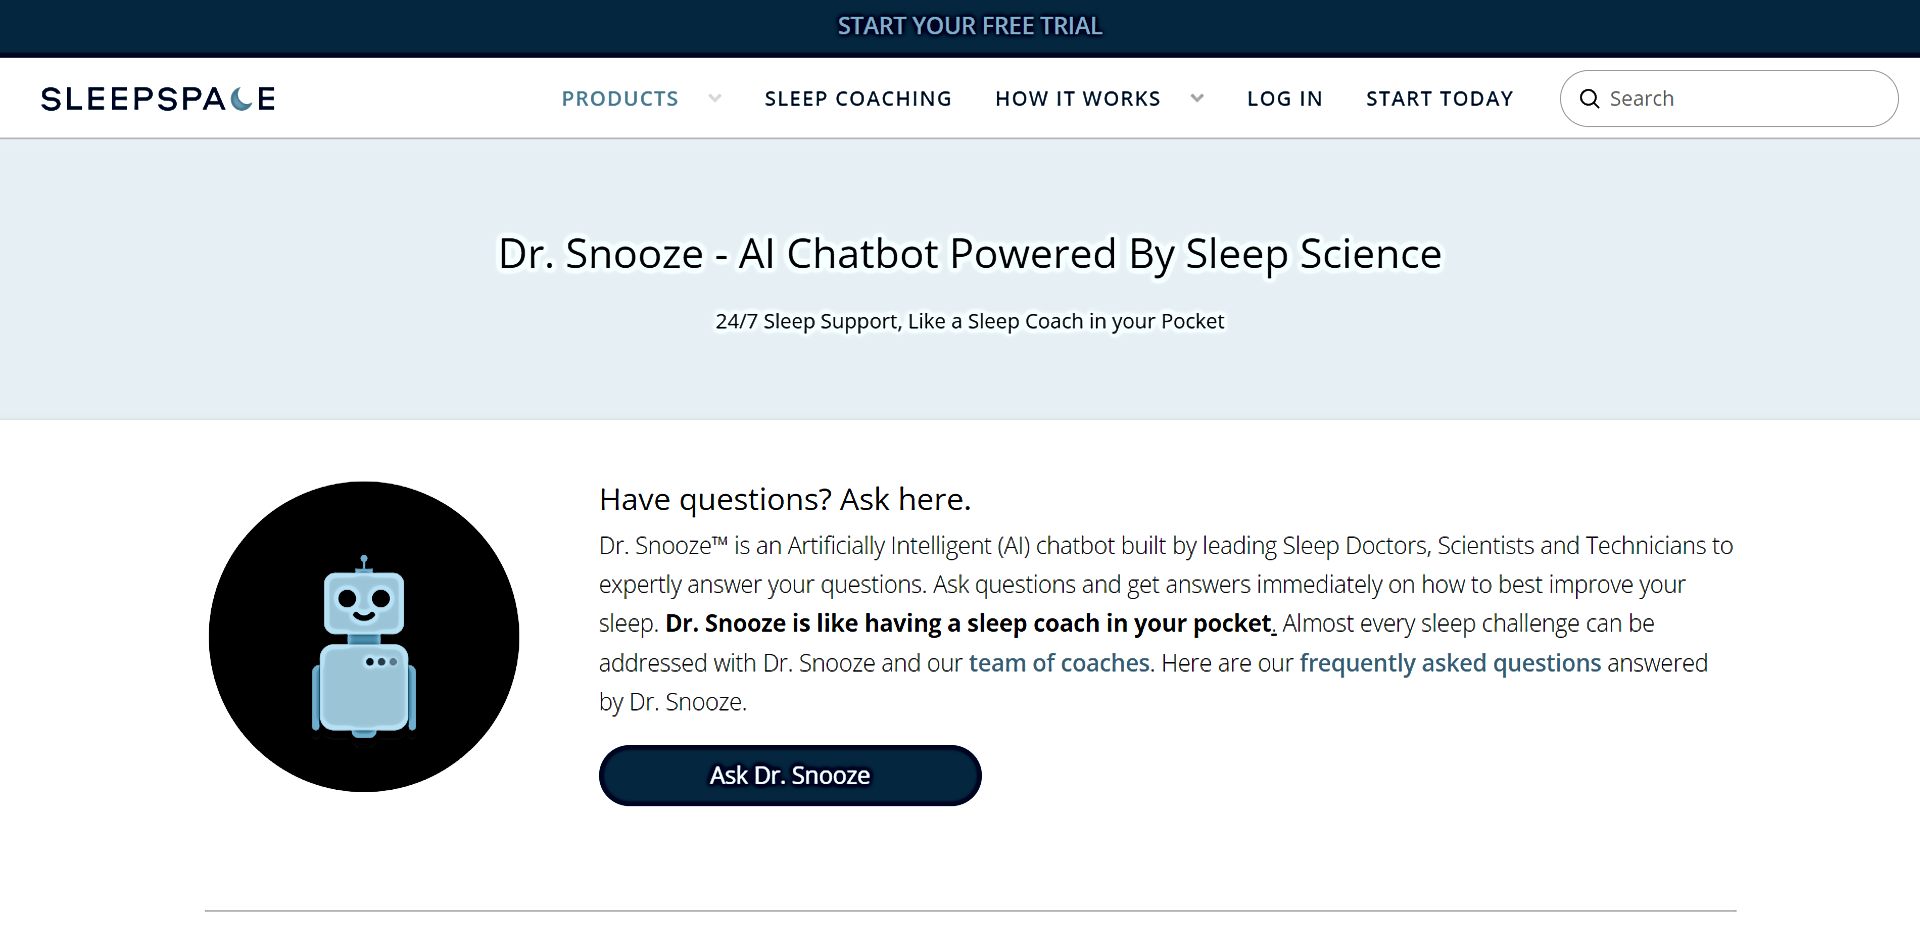 Dr. Snooze featured